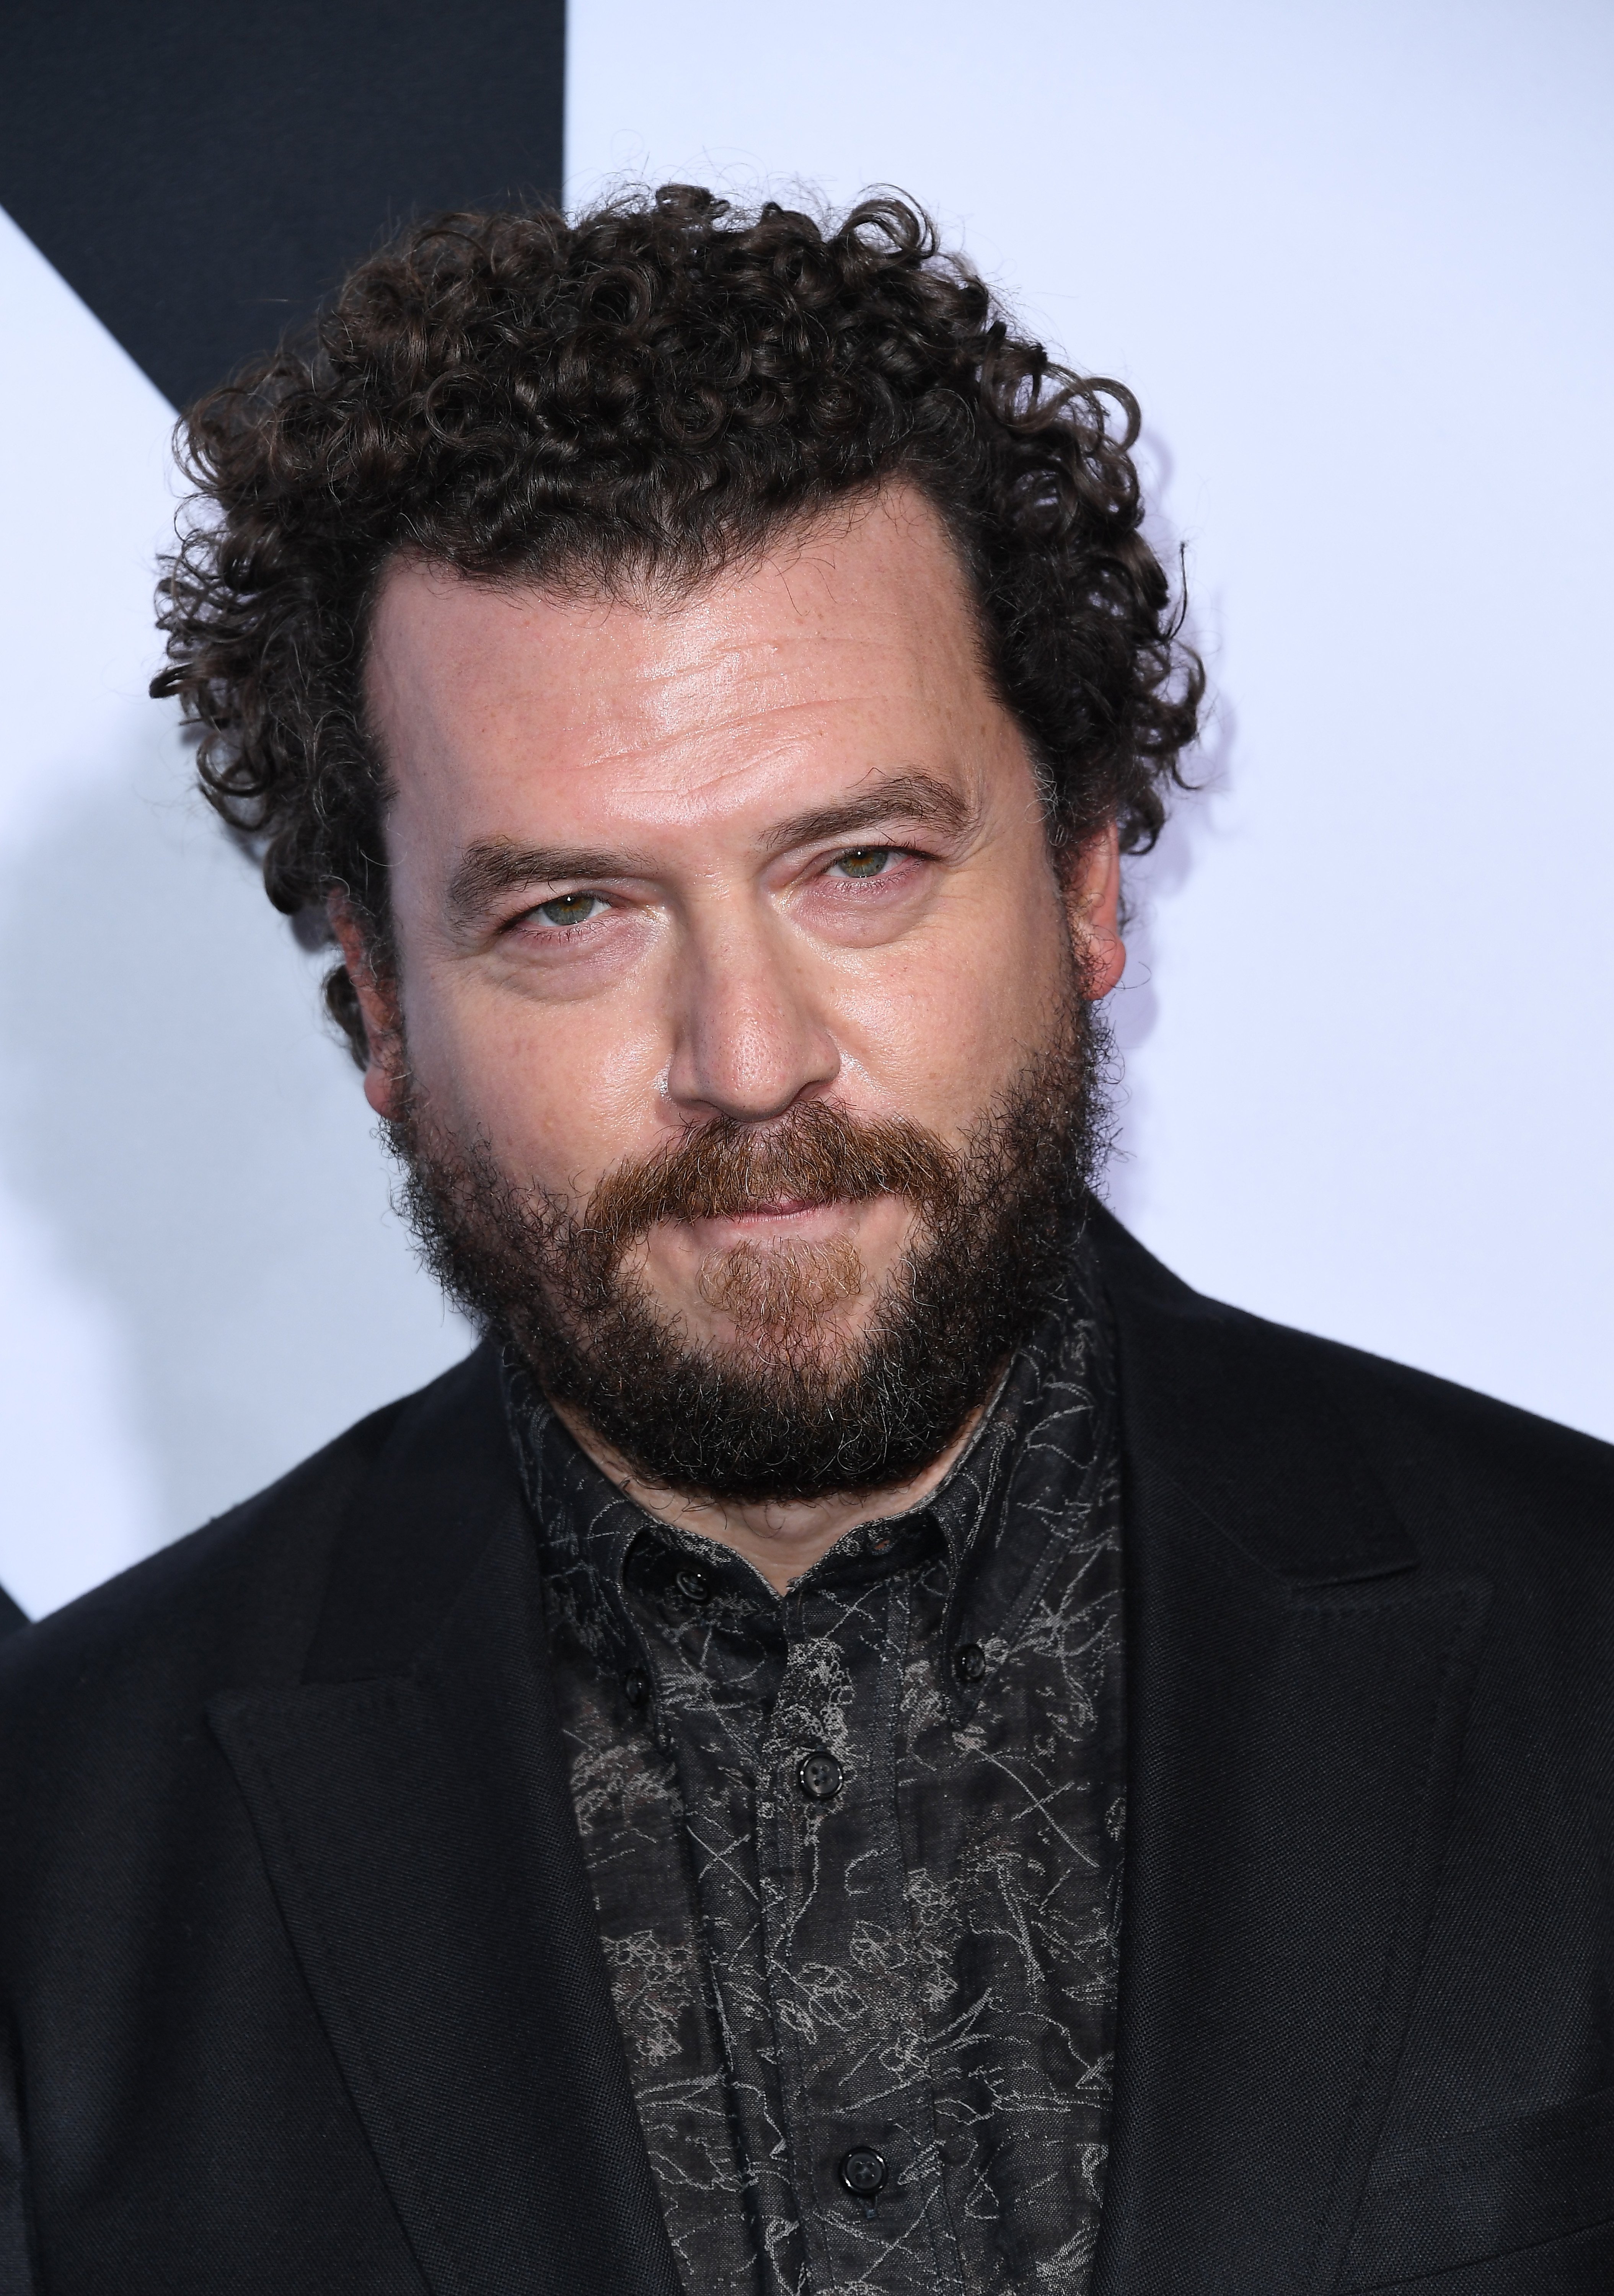 Danny McBride attends the premiere of Universal Pictures' "Halloween" at TCL Chinese Theatre on October 17, 2018 in Hollywood, California. | Source: Getty Images